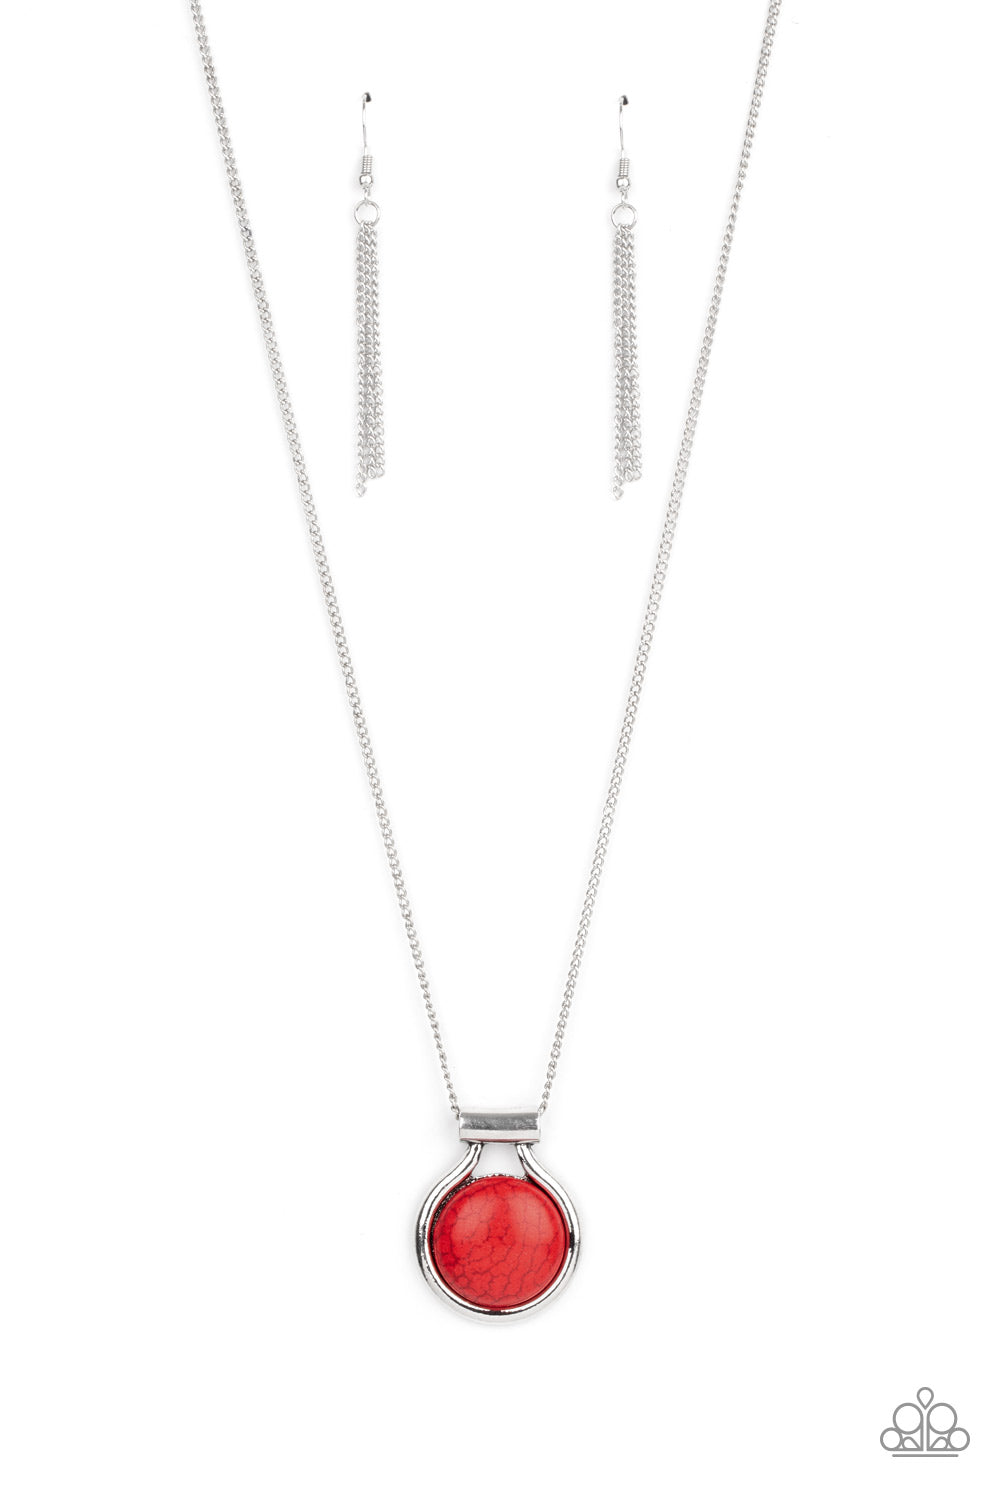 Patagonian Paradise - Red Necklace